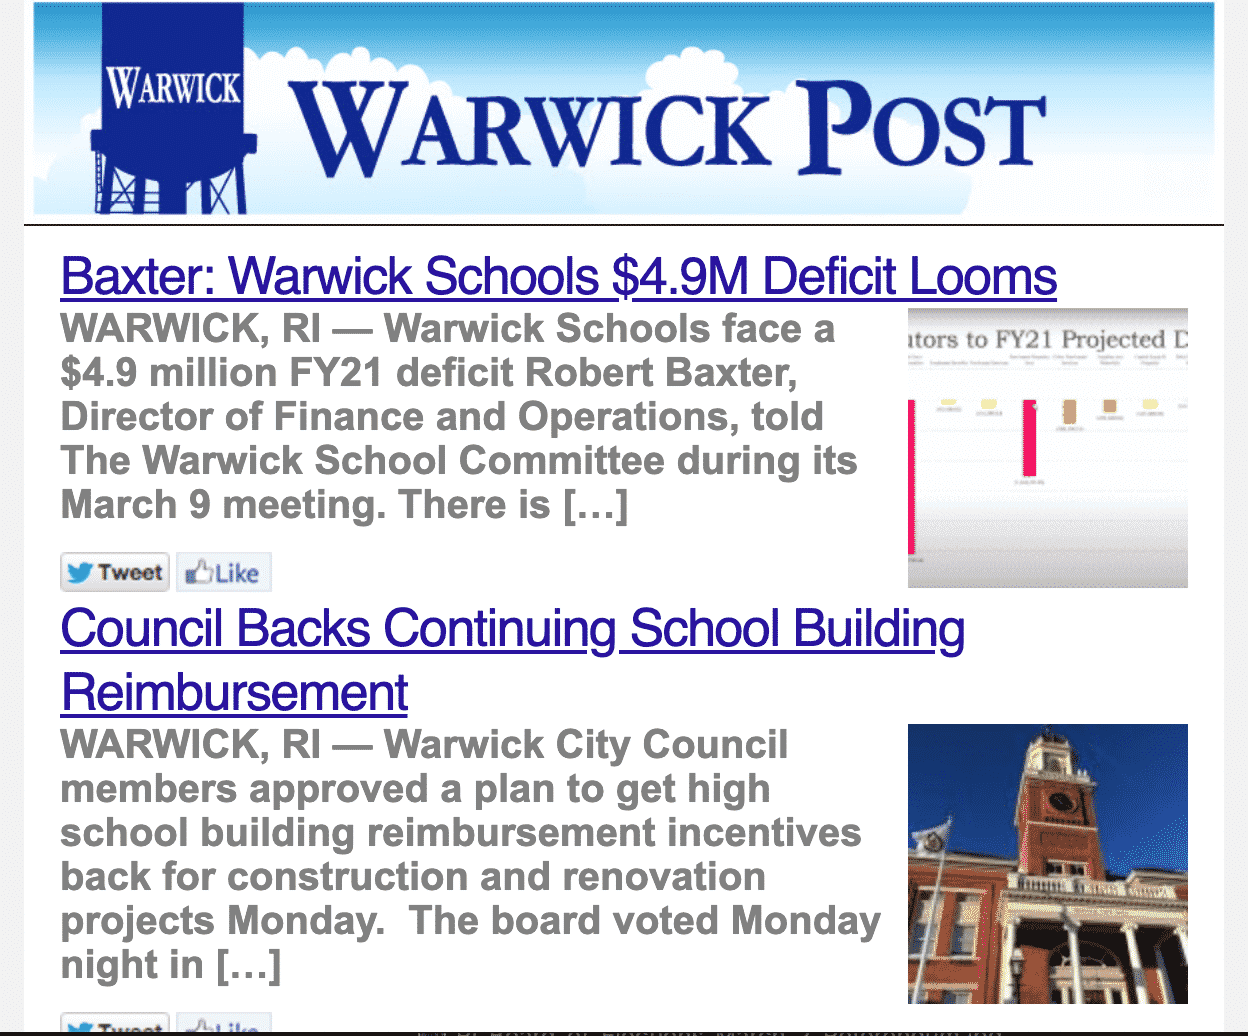 [CREDIT: Warwick Post] The daily Warwick Post newsletter keeps you up to date on all WarwickPost.com stories. Subscribe to read beyond the headlines for only $1.50 a month.